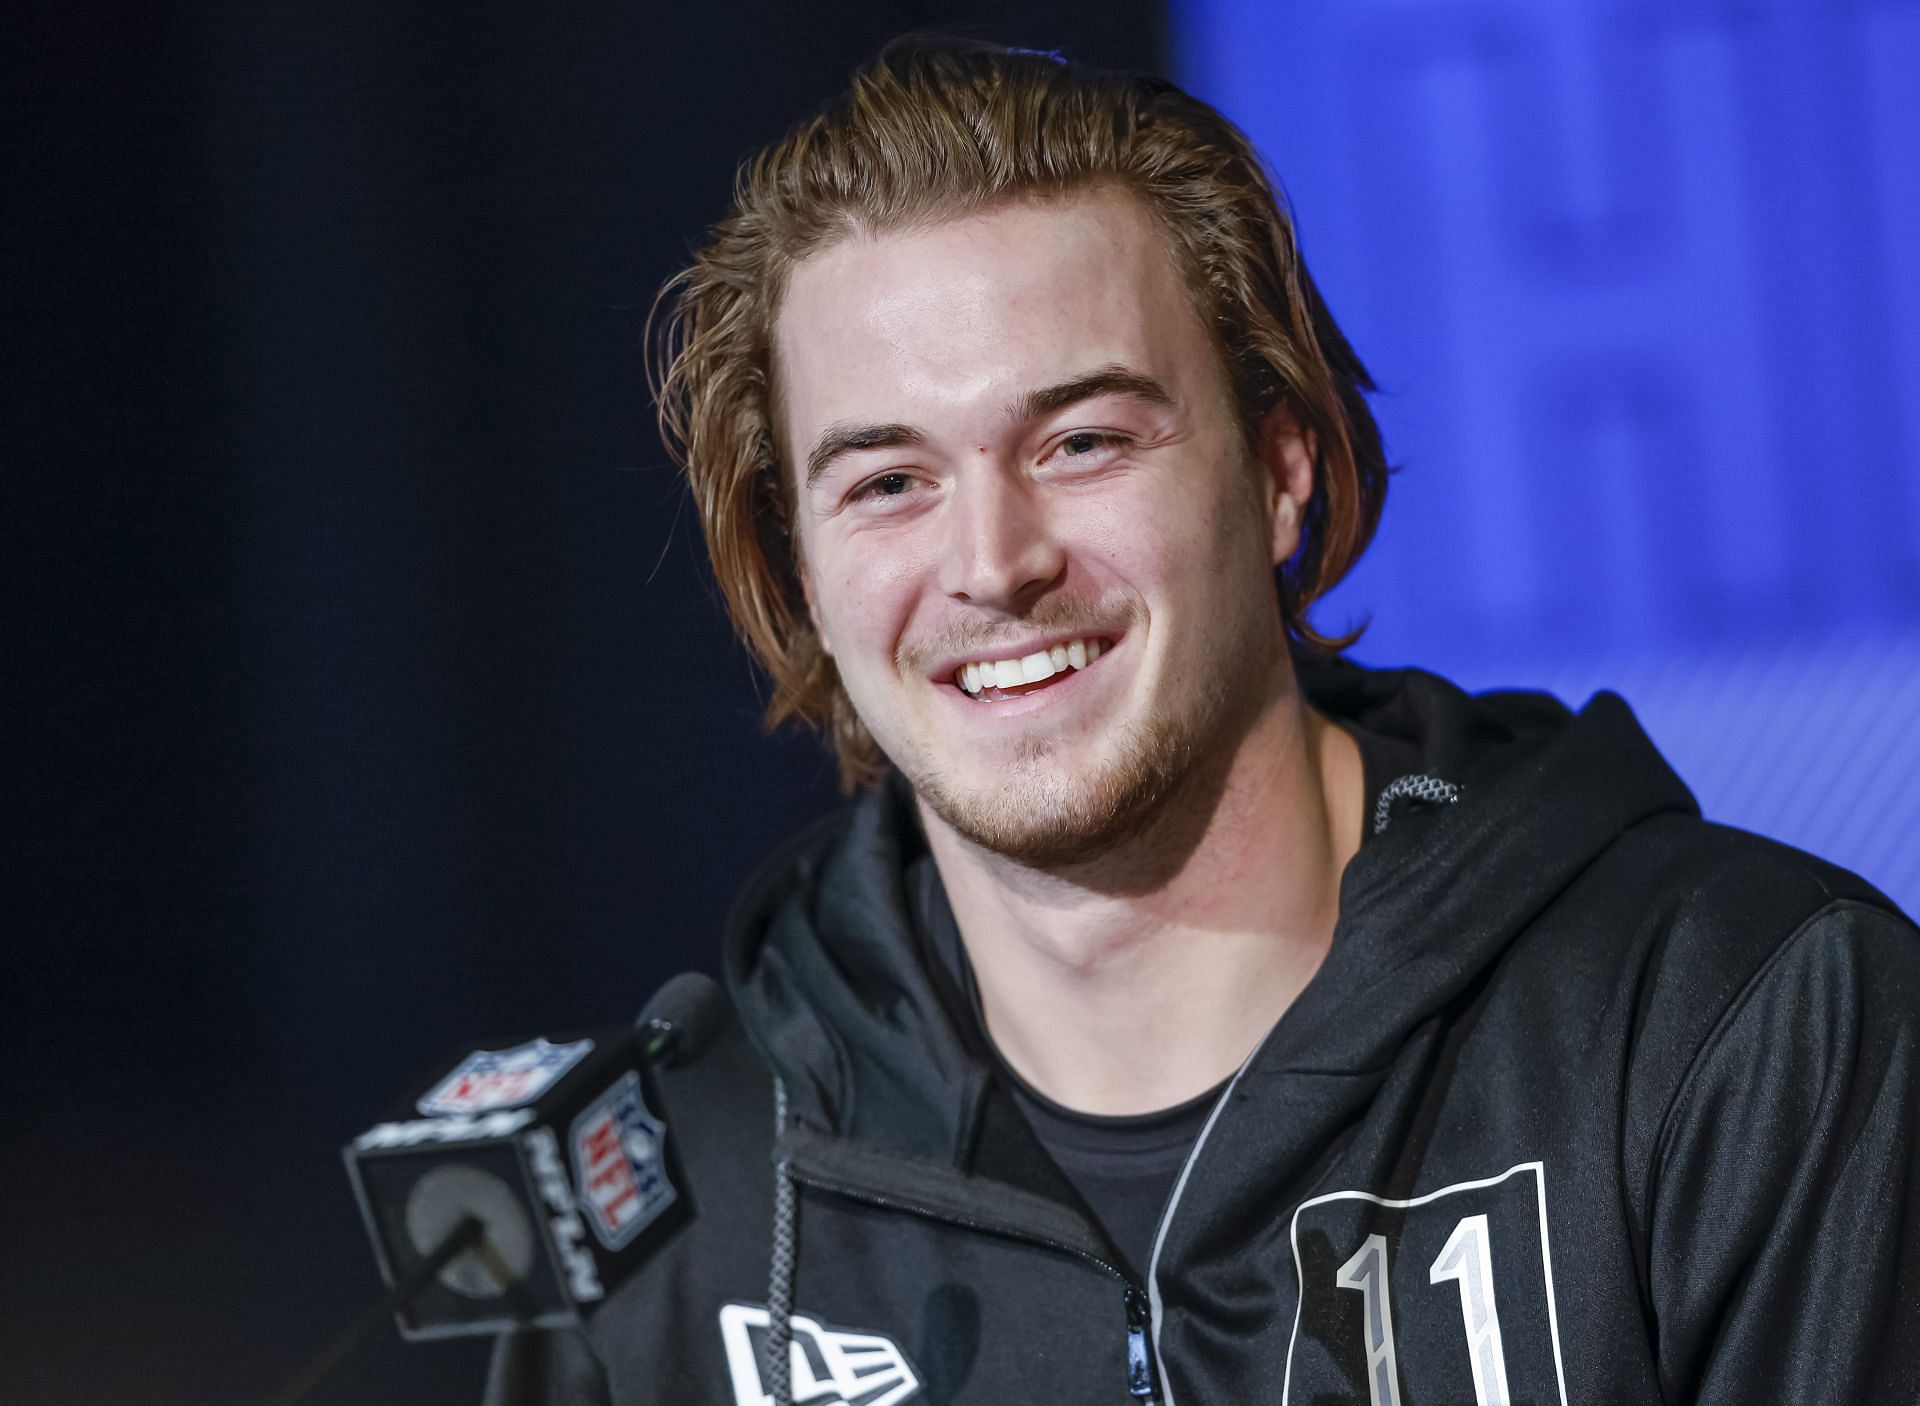 No. 8 at a press conference at the NFL Combine